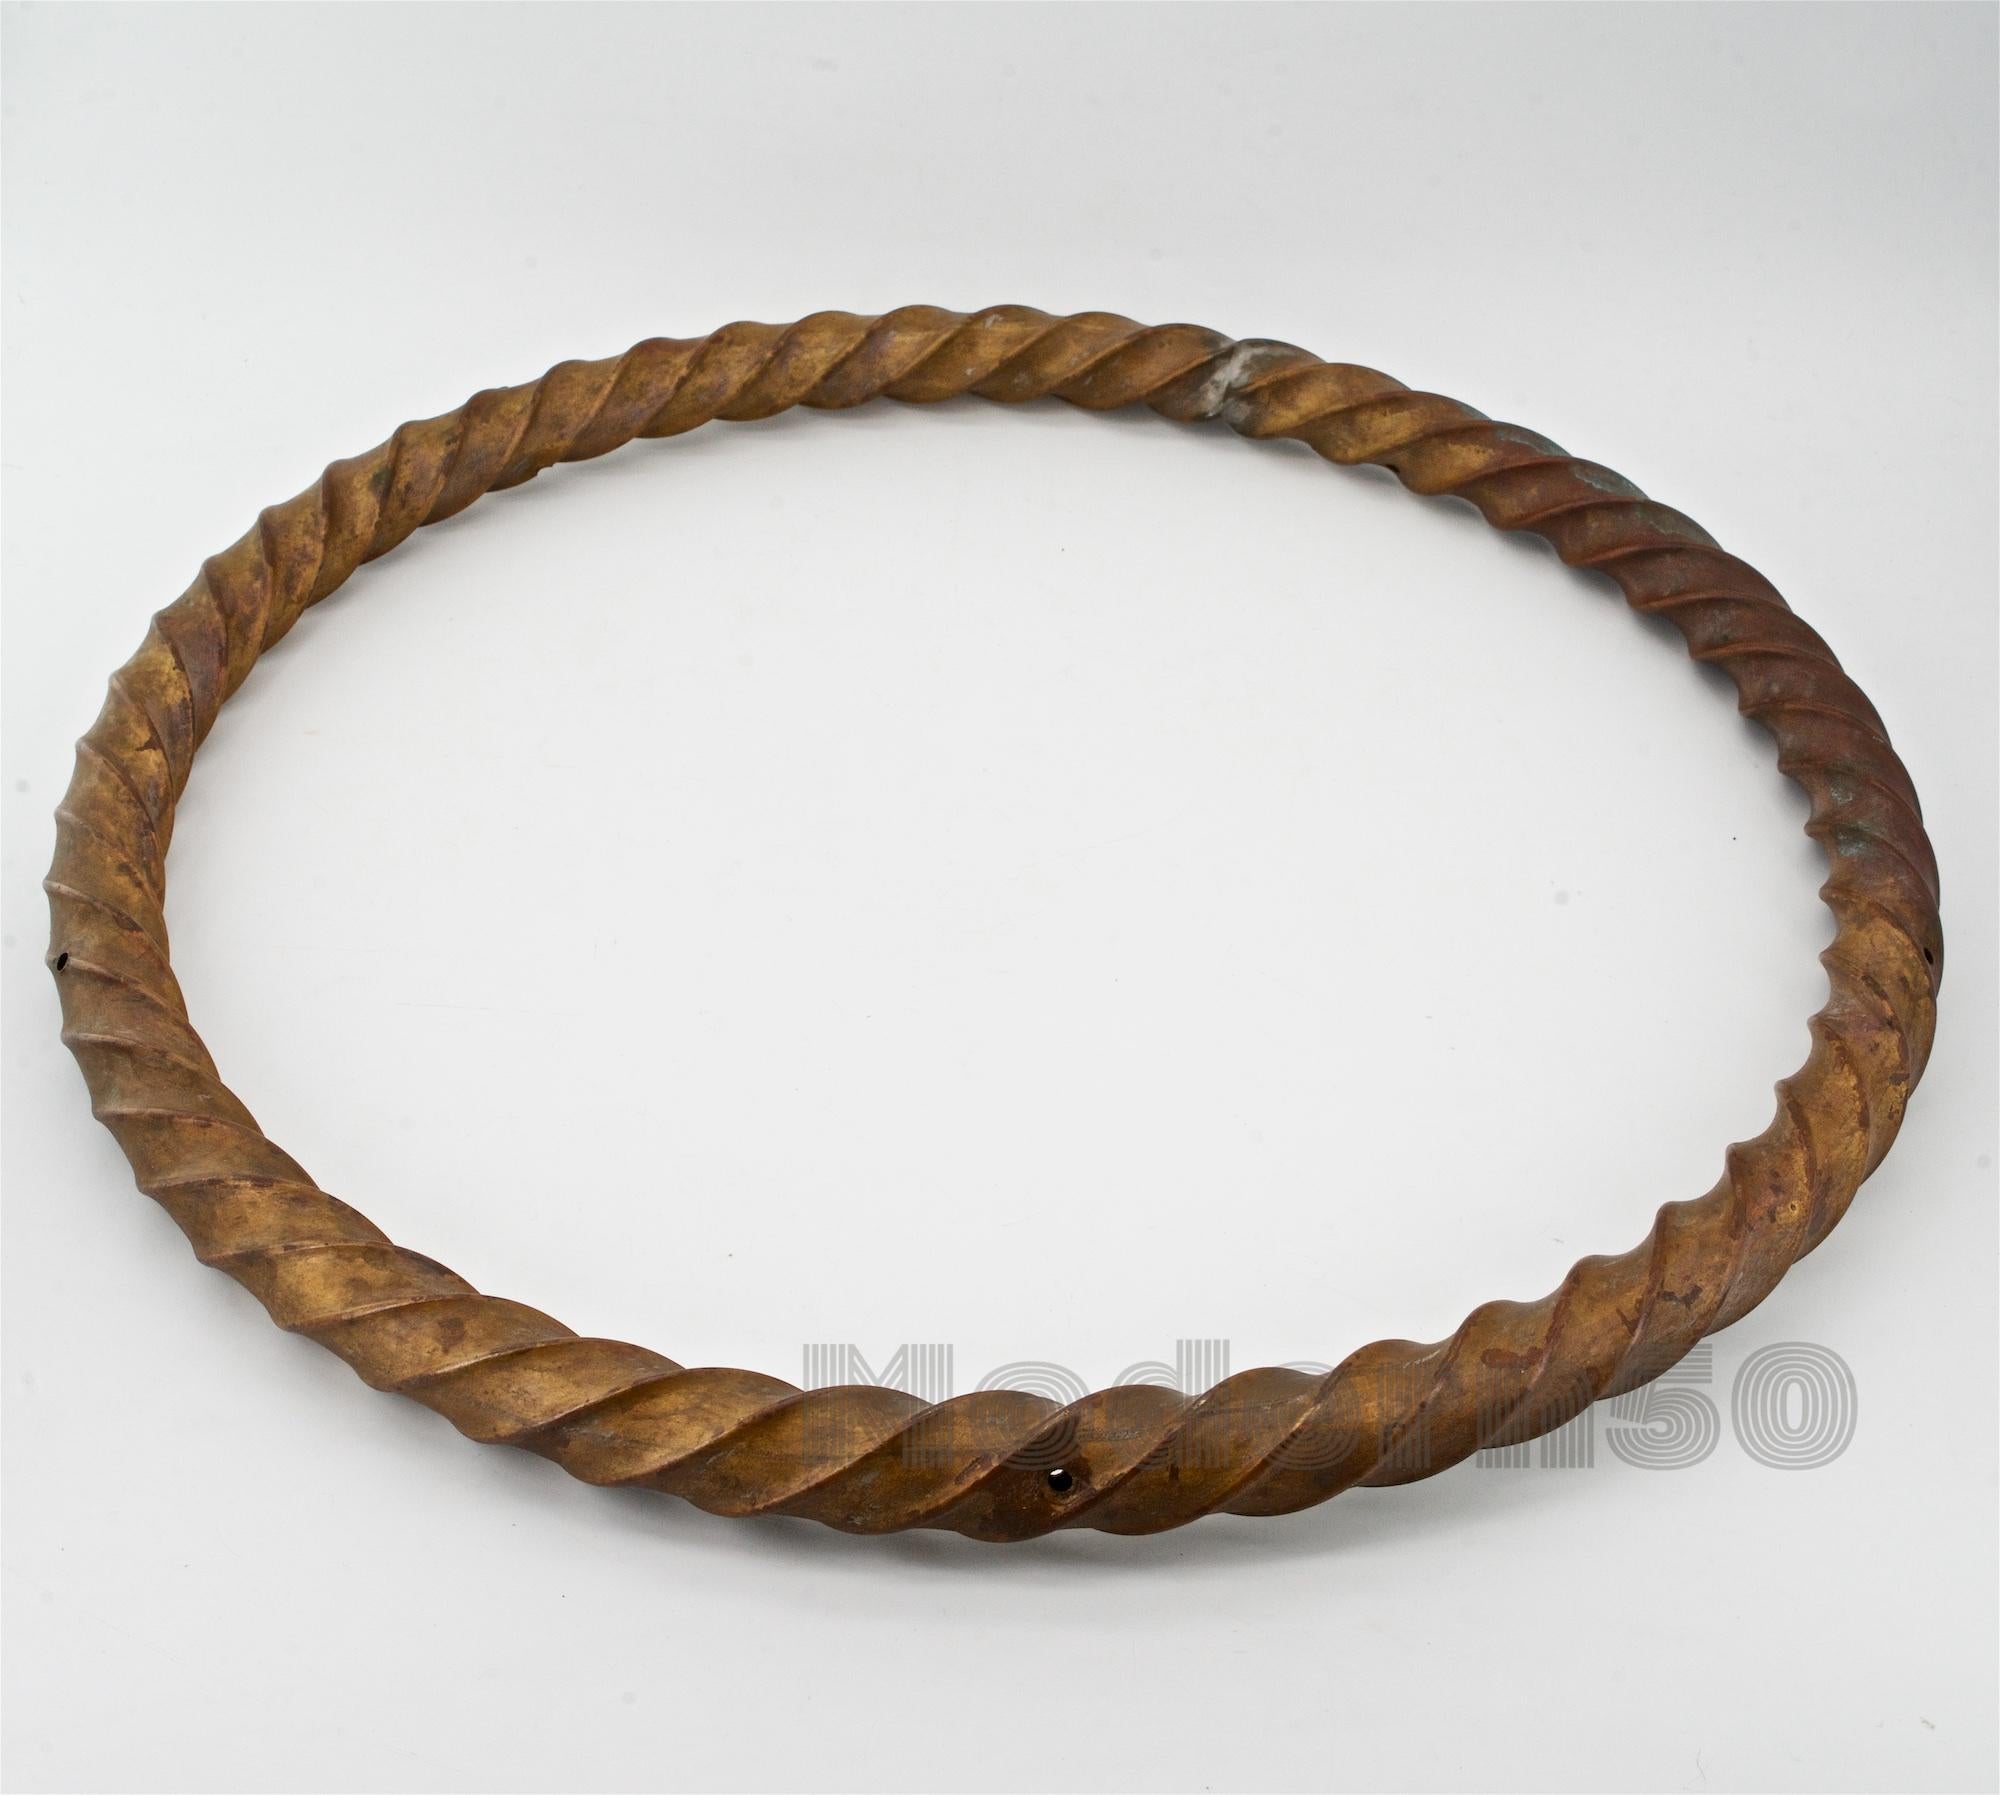 Antique late 19th century twisted Lanyard pattern copper tube circle form. Could be mounted or hung. Hollow with some holes from the hand crafting.